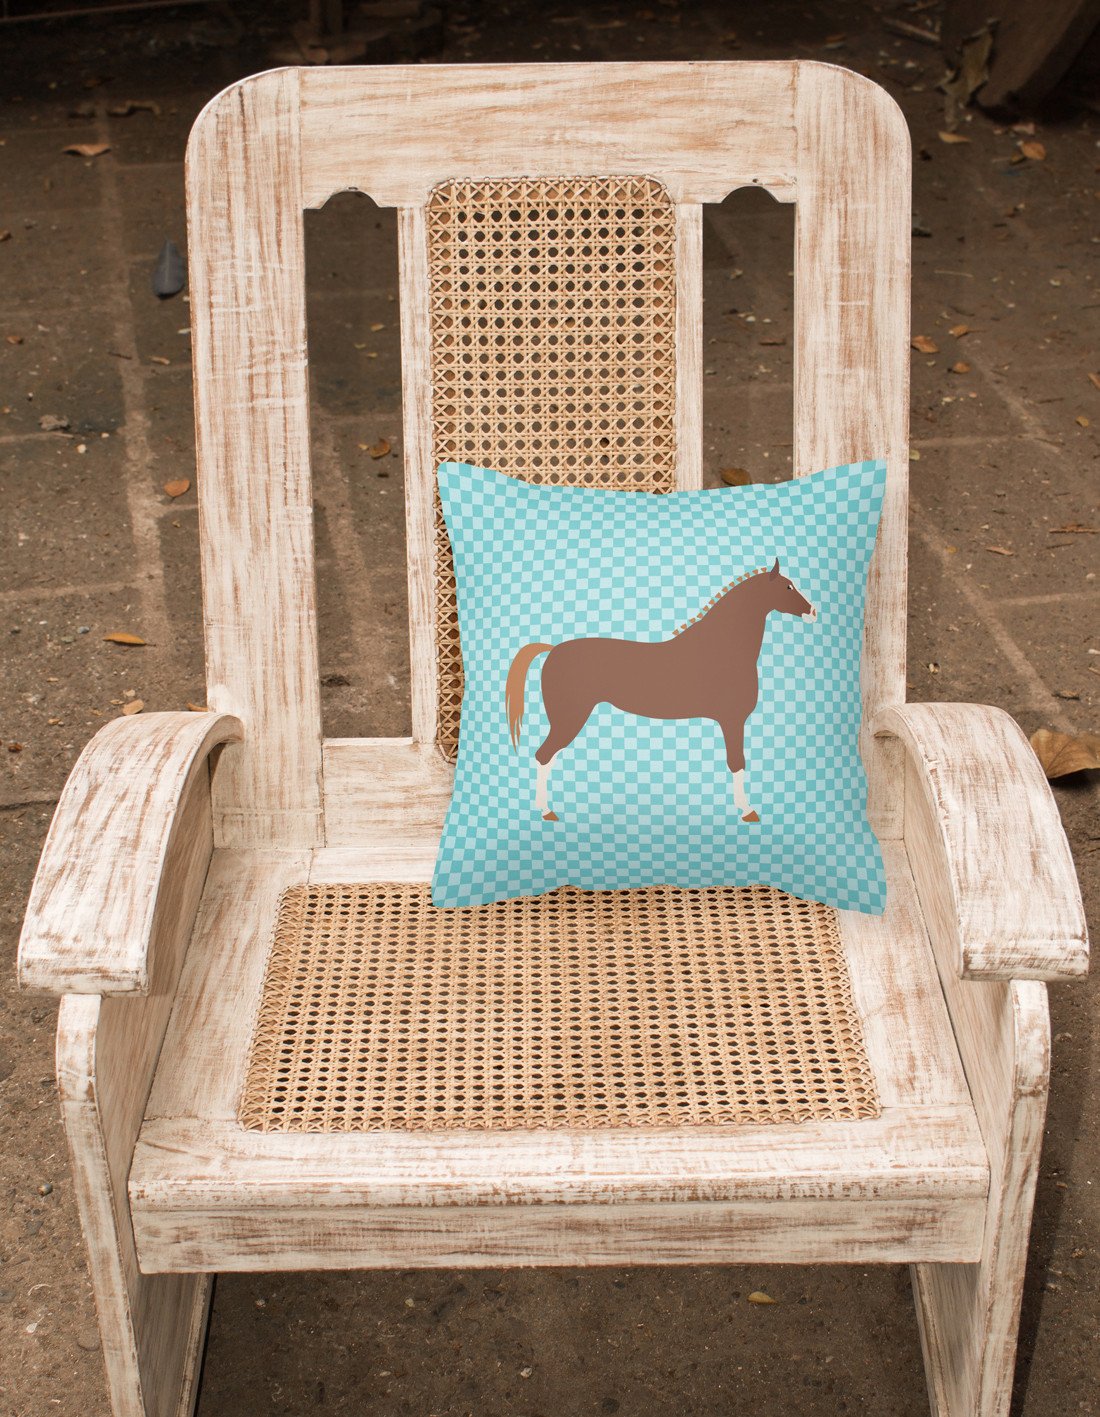 Hannoverian Horse Blue Check Fabric Decorative Pillow BB8083PW1818 by Caroline's Treasures